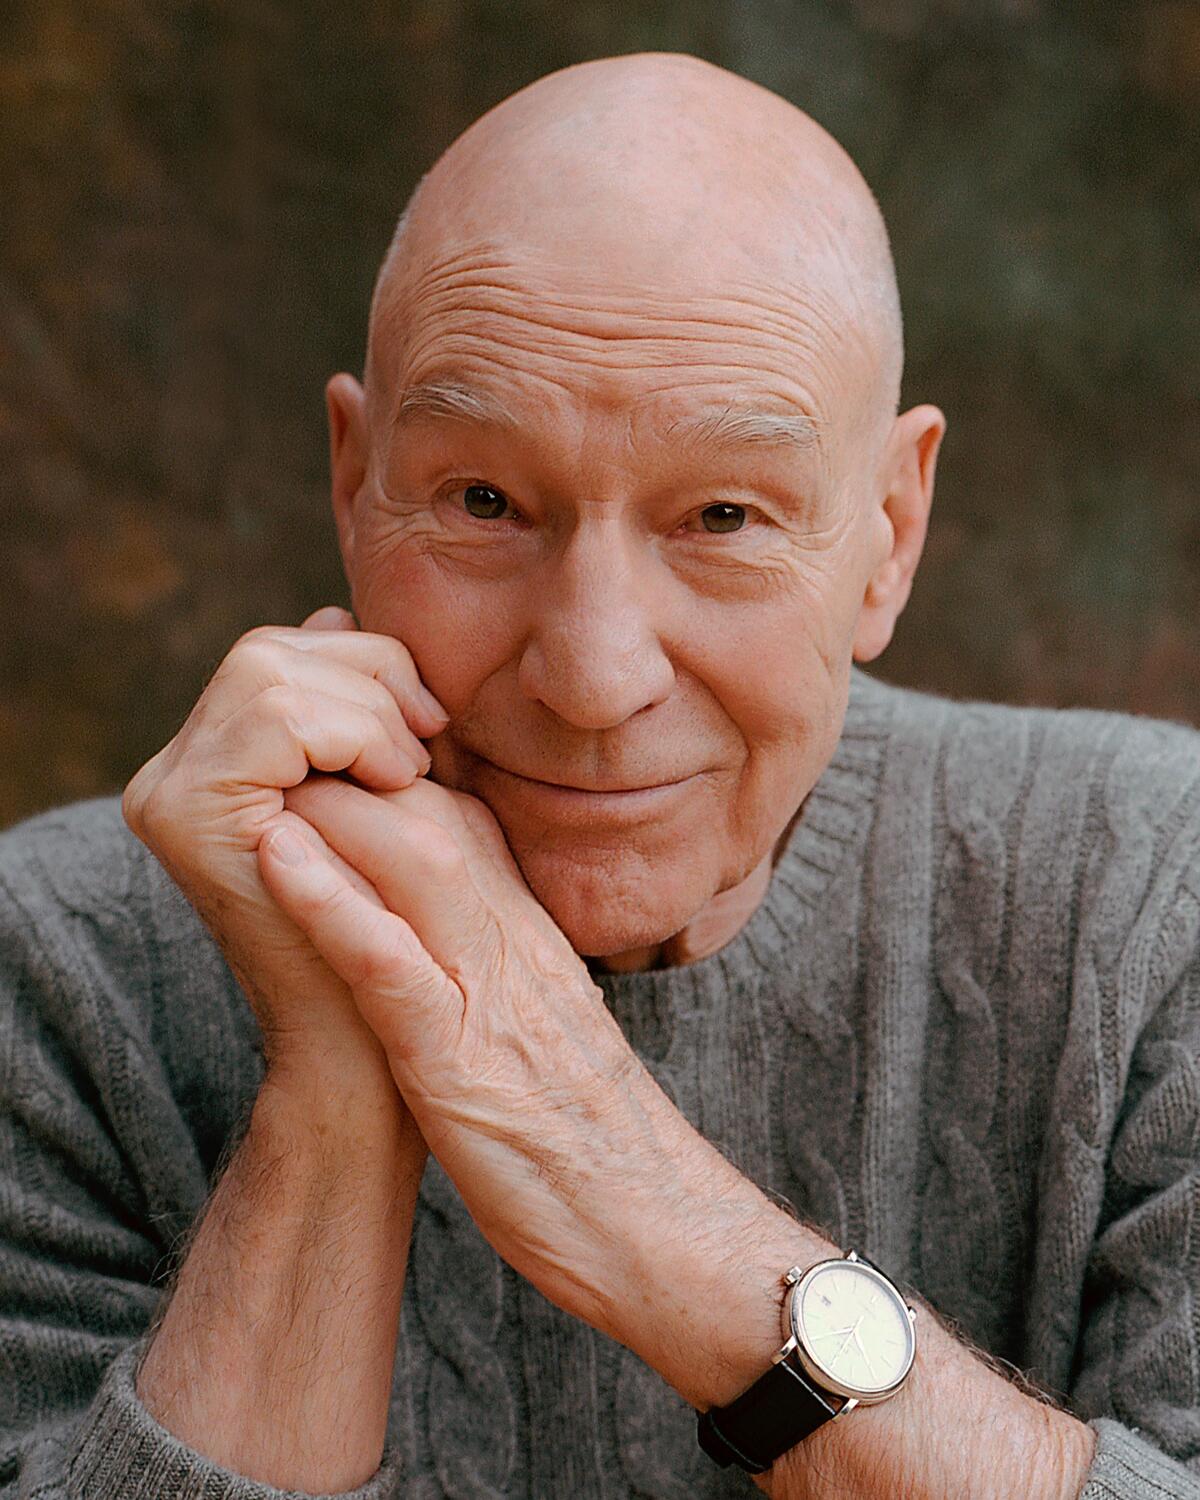 A close-up image of the actor Patrick Stewart